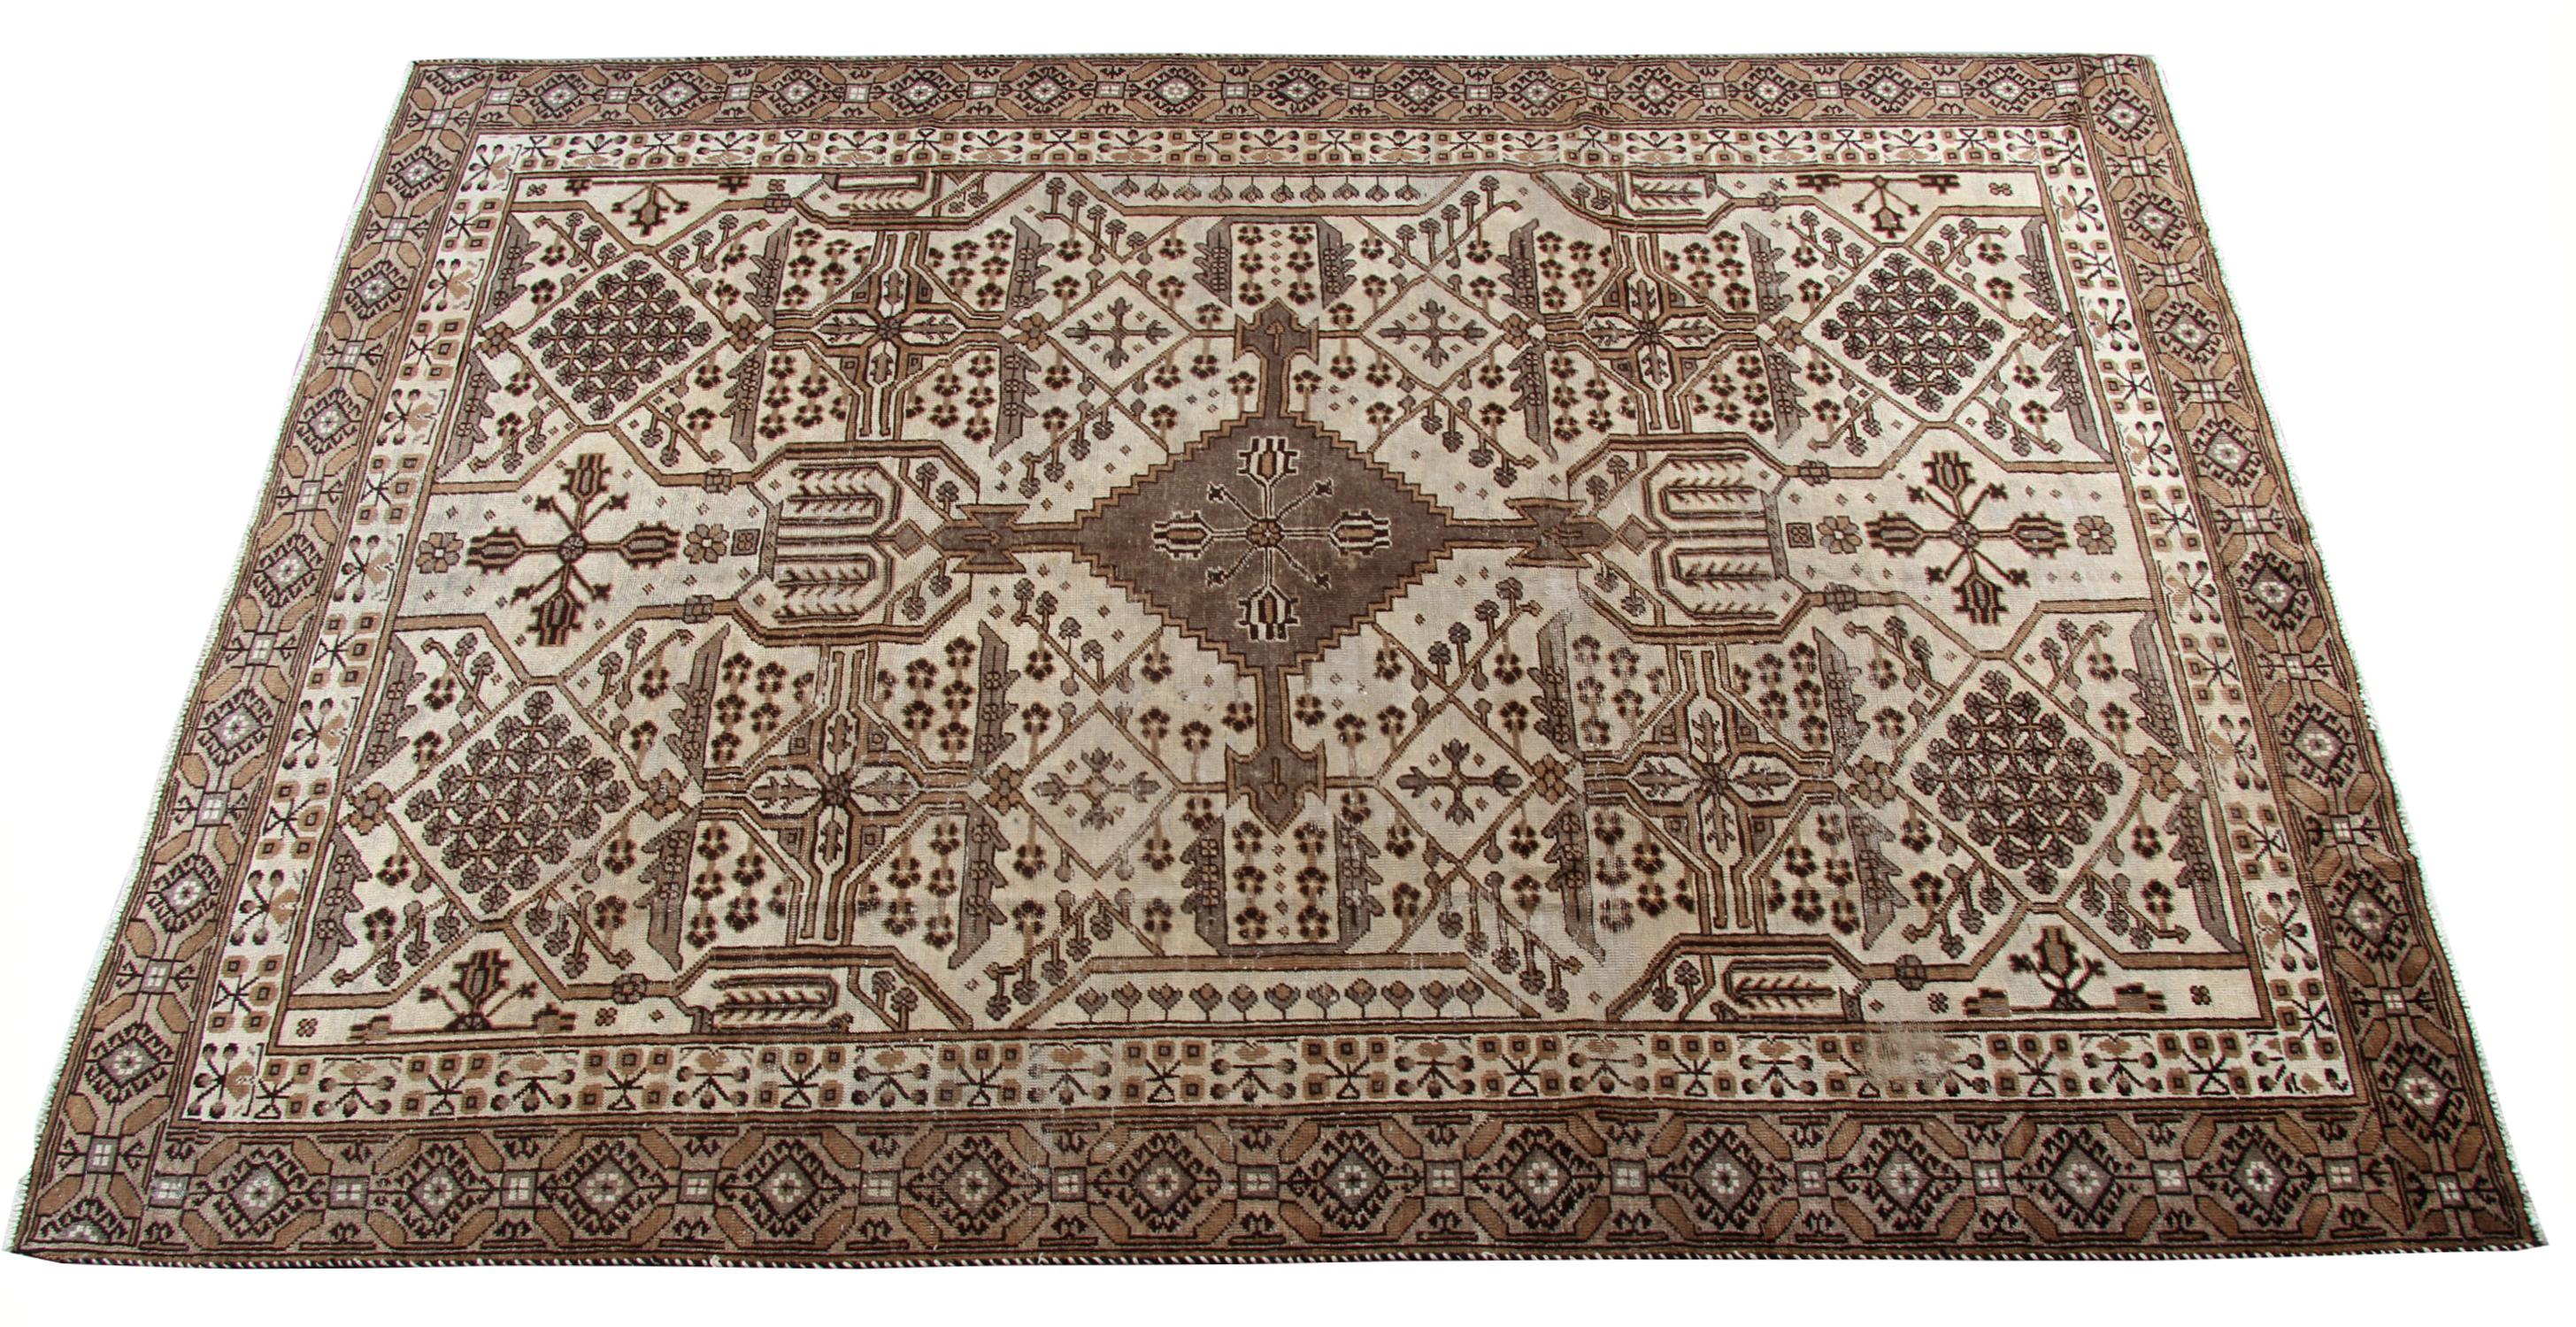 This handmade carpet woven rug is an old Turkish carpet, circa the 1950 and is a patterned oriental rug with all-over Rustic rug design 100% natural rugs made of organic dyes in excellent condition. This grey rug can be suitable as dining room rugs